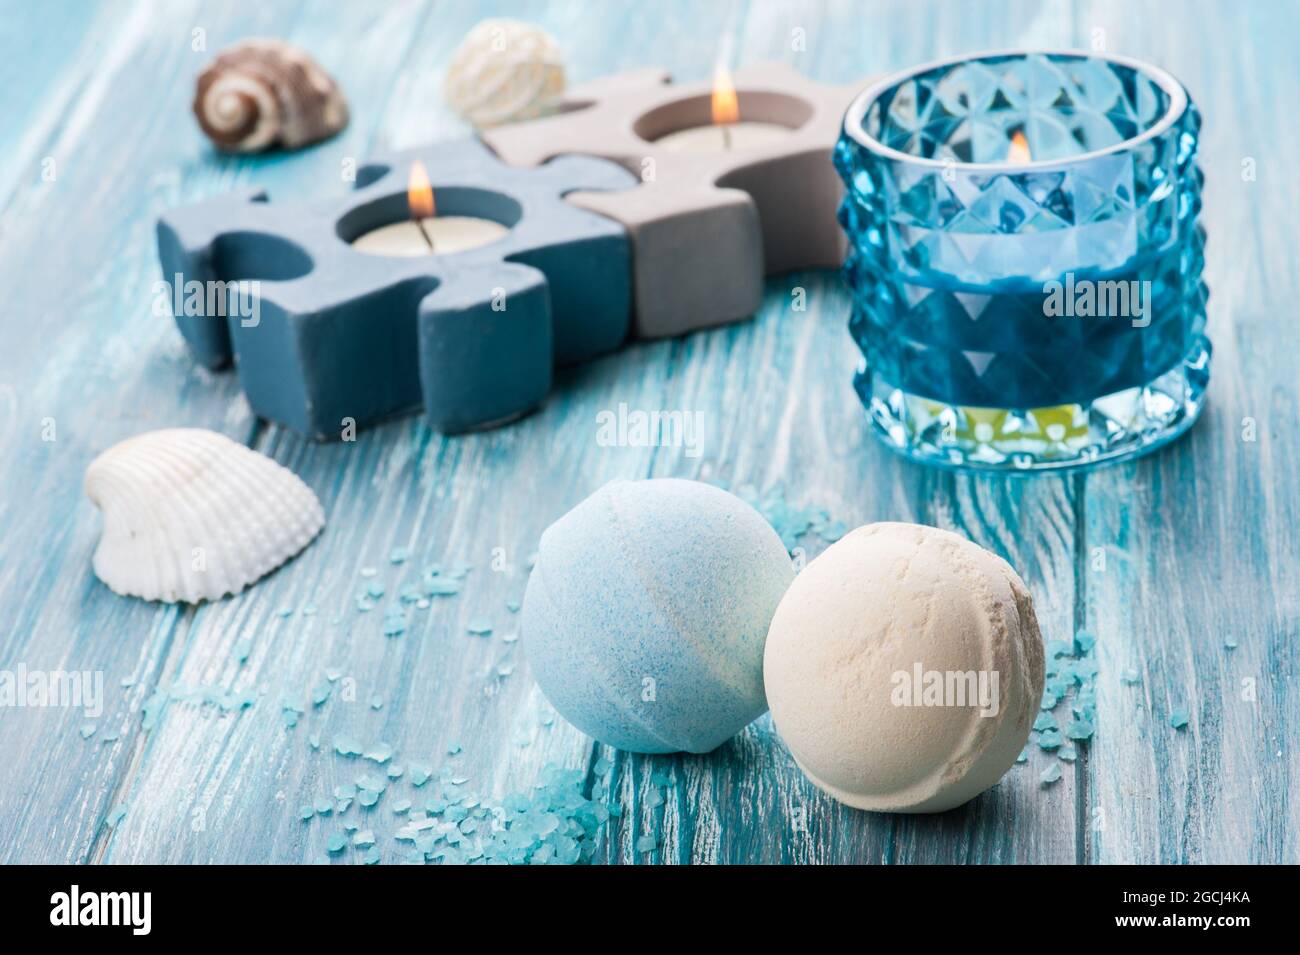 SPA still life, closeup of blue lit candle and bath bombs on wooden background Stock Photo